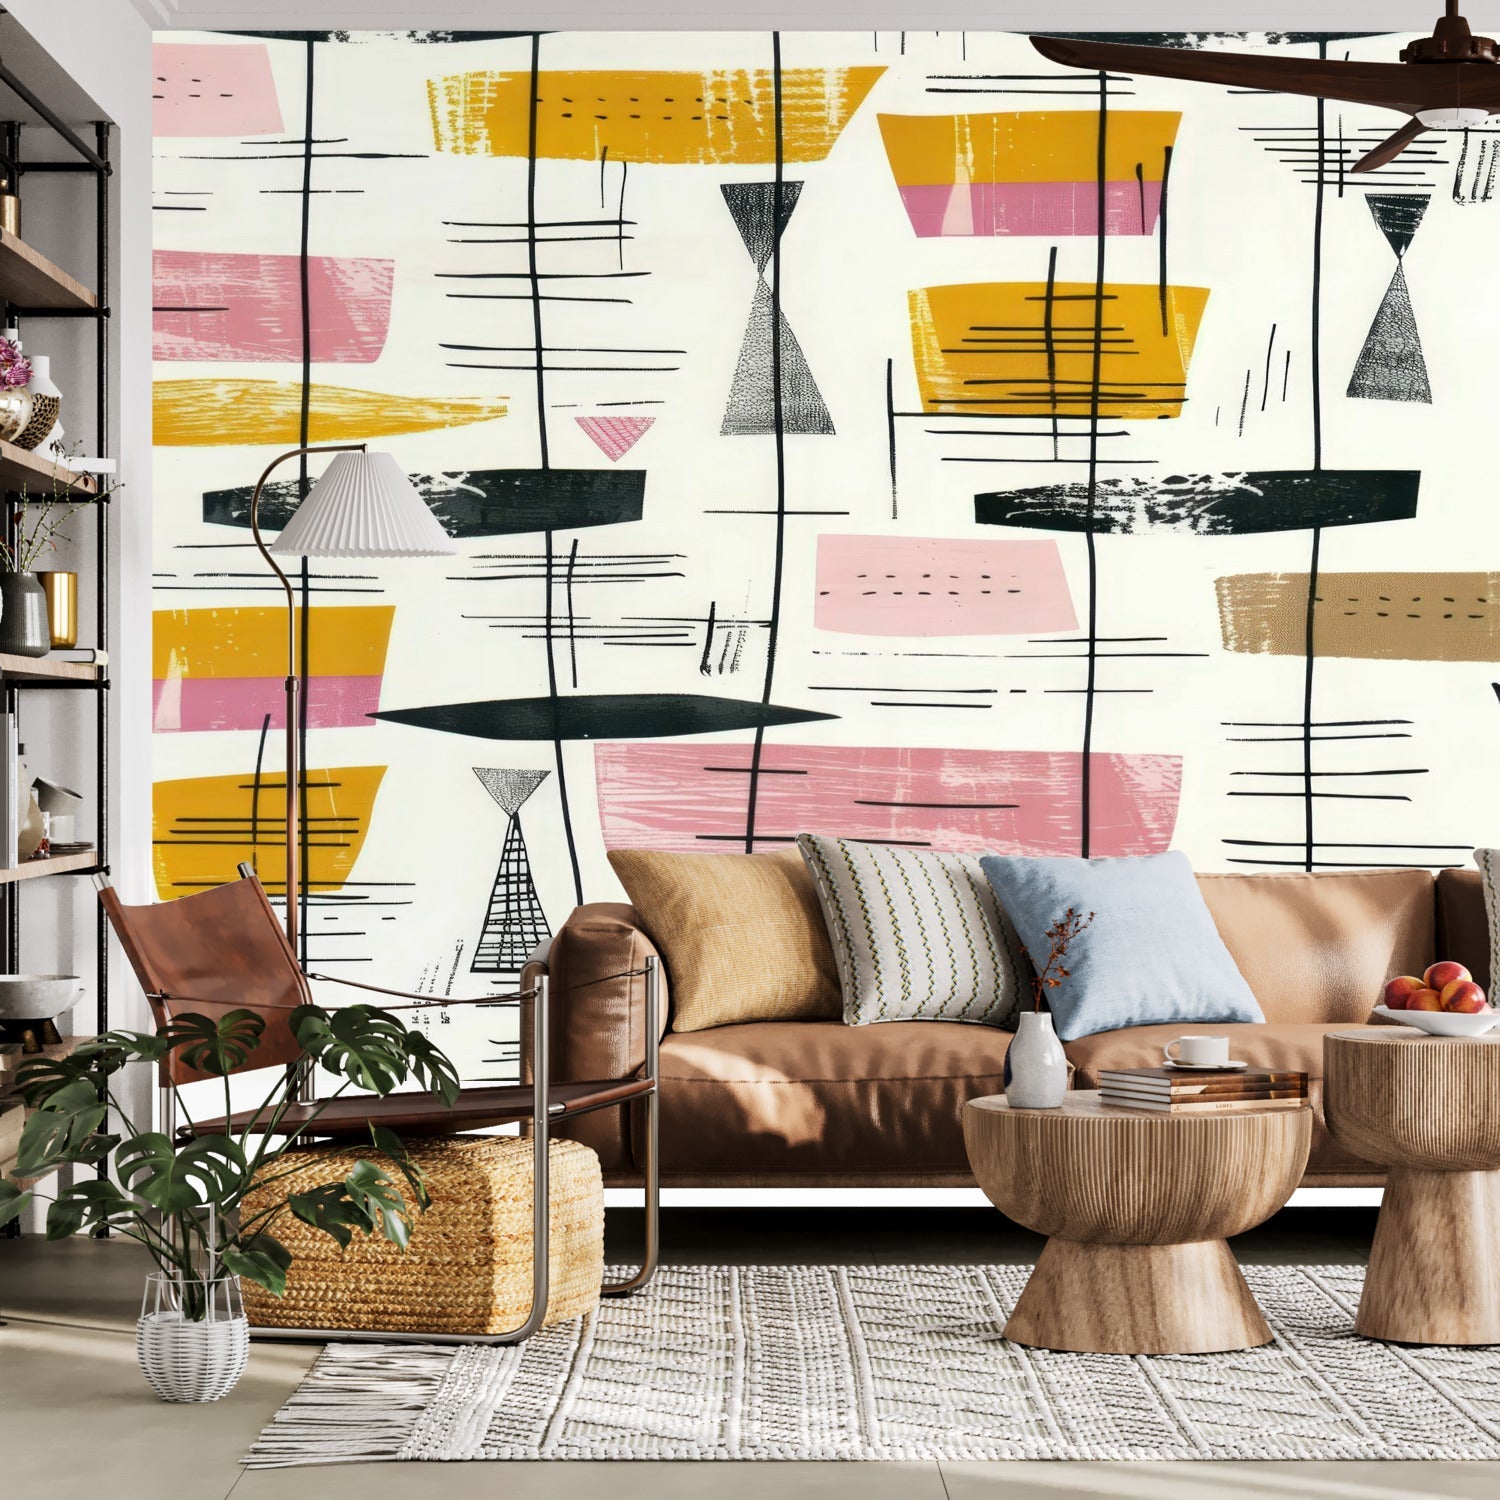 Kate McEnroe New York Retro Abstract Wall Mural, Mid Century Modern Peel And Stick Design, 1950s Style Home Decor, Geometric Mural Panels, Vintage Accent Wall ArtWall Mural118579